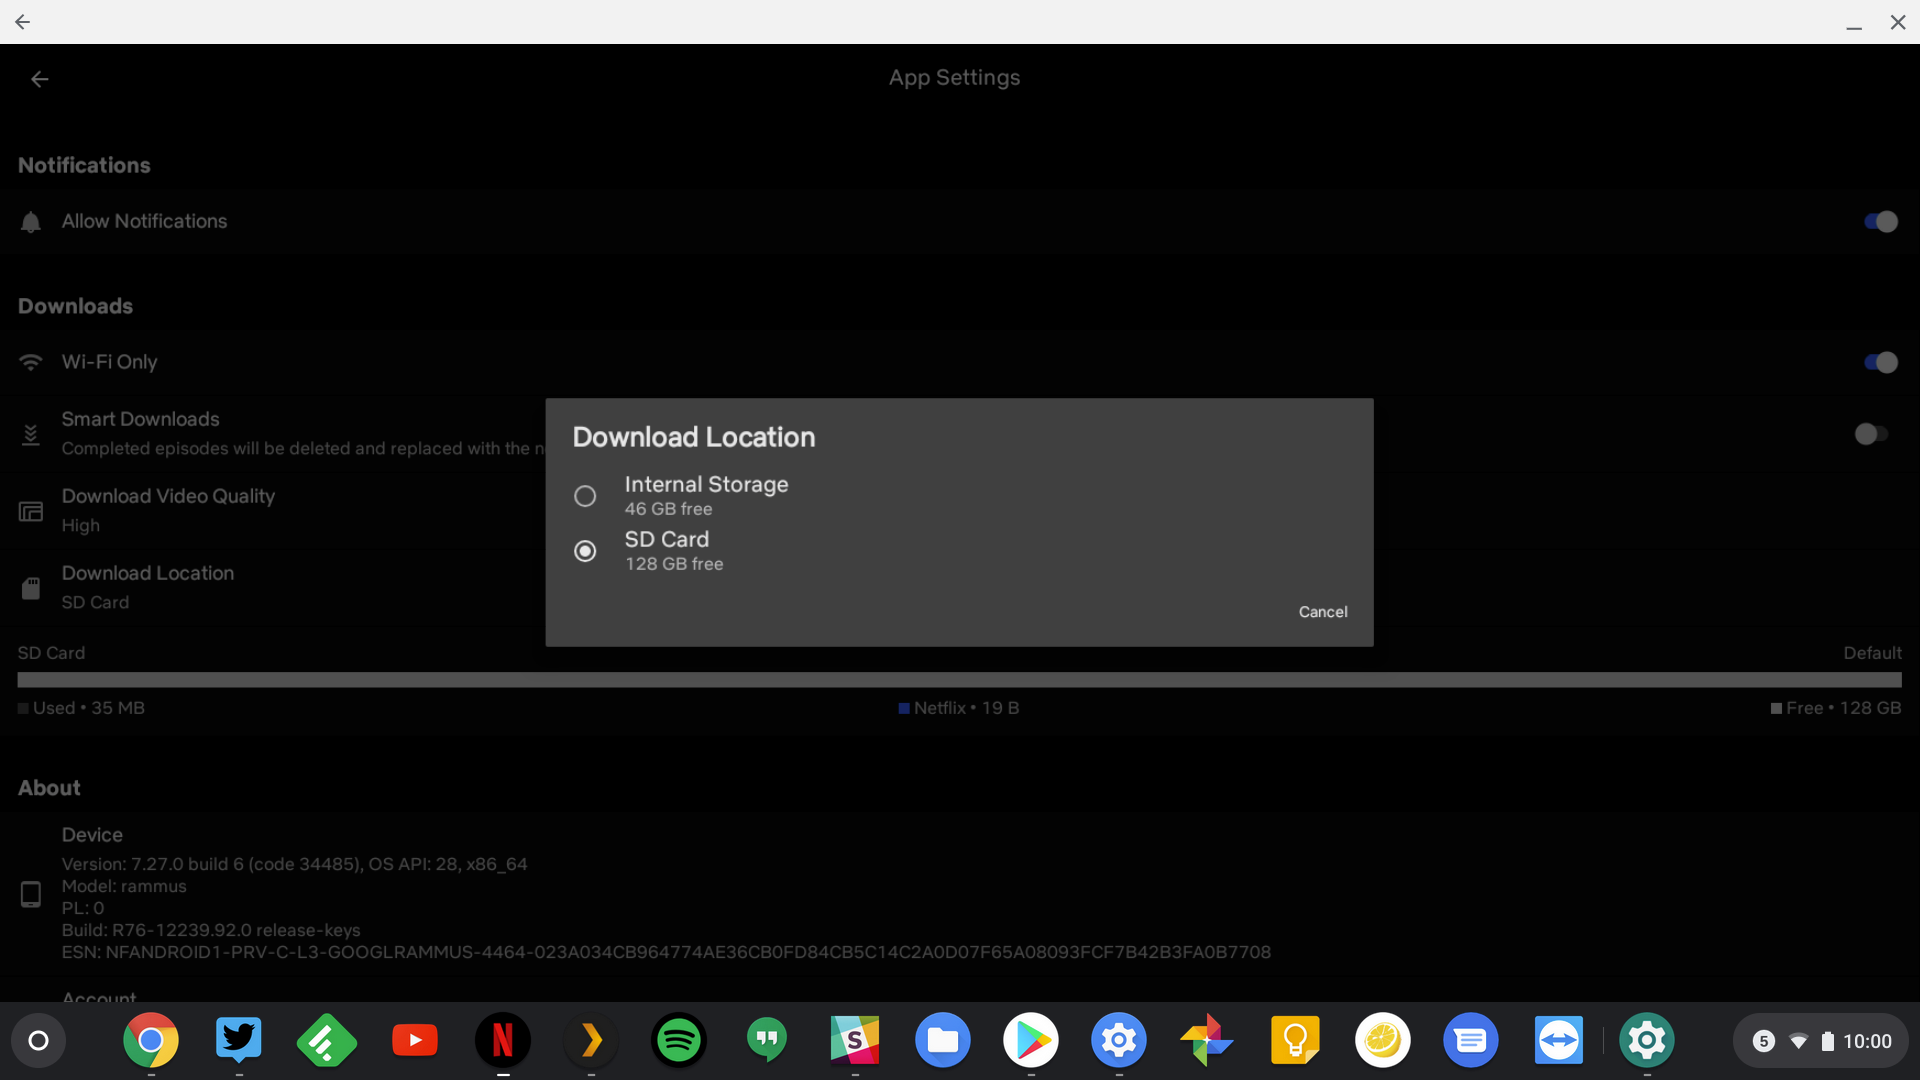 Netflix app showing sd card download location